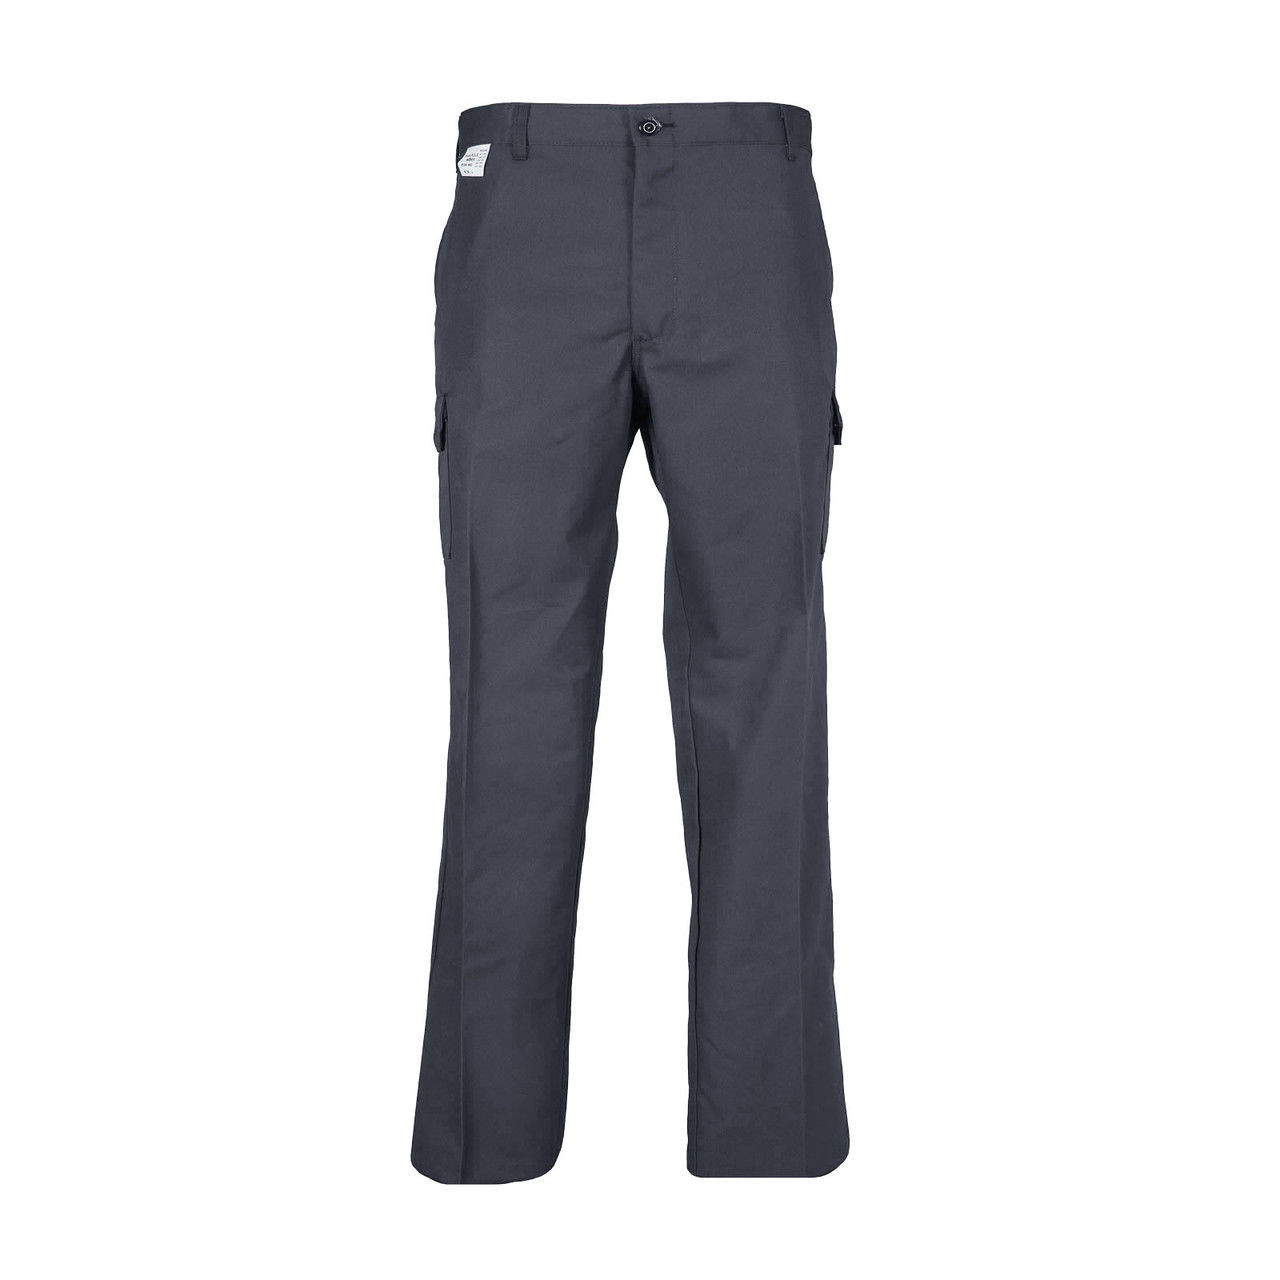 Endurance Work Trousers Zero Flame and Acid Resistant - Protekta Safety Gear